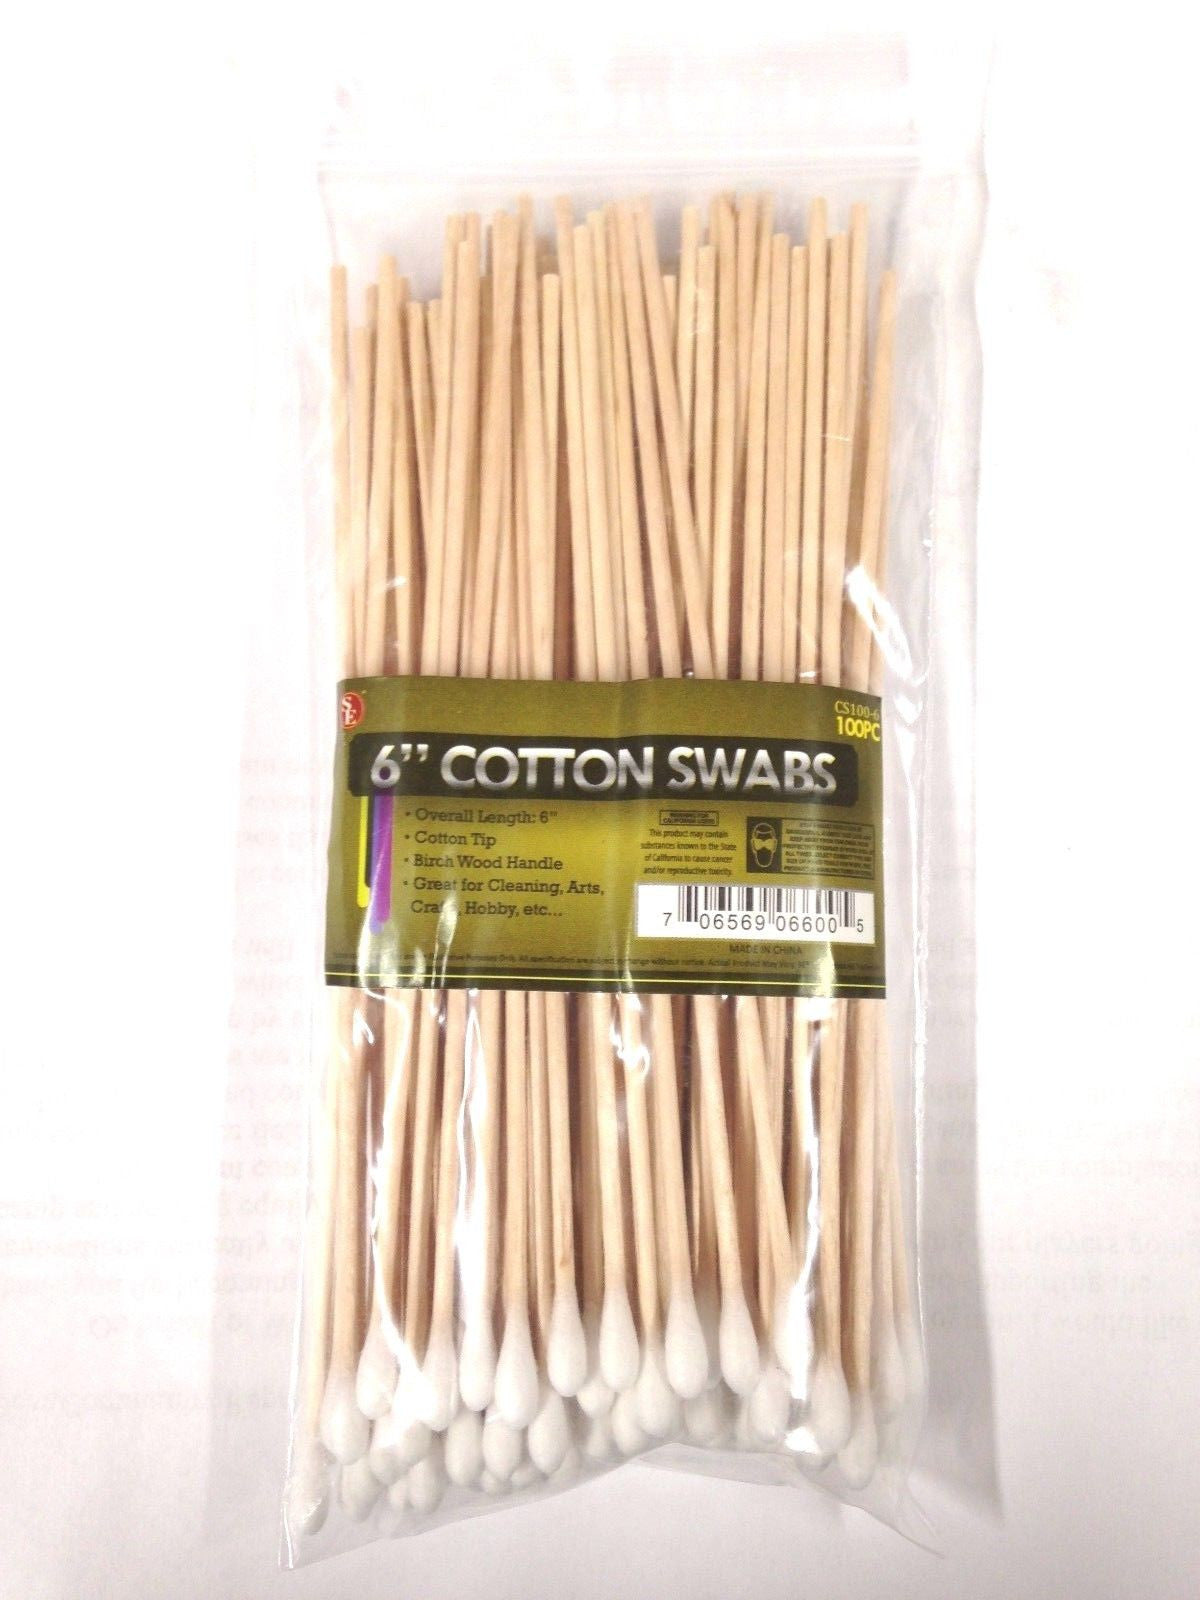 SE CS100-6 6” Cotton Swabs with Wooden Handles (Pack of 100)